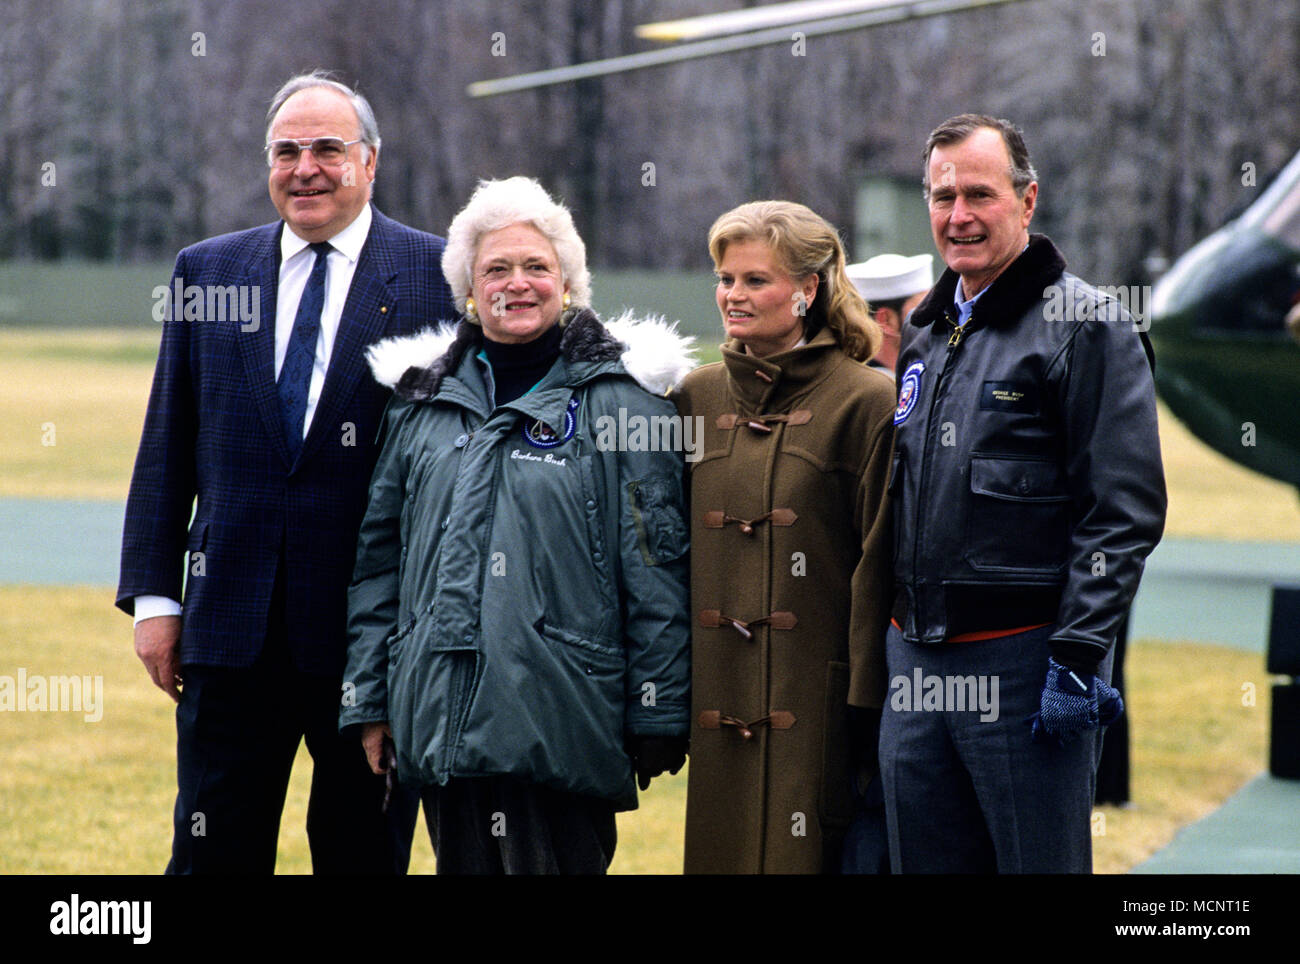 United States President George H.W. Bush, right, and first lady Barbara Bush, left center, welcome Chancellor Helmut Kohl of West Germany, left, and his wife, Hannelore, right center, to Camp David, the presidential retreat near Thurmont, Maryland on February 24, 1990. Credit: Ron Sachs/CNP Photo via Credit: Newscom/Alamy Live News Stock Photo